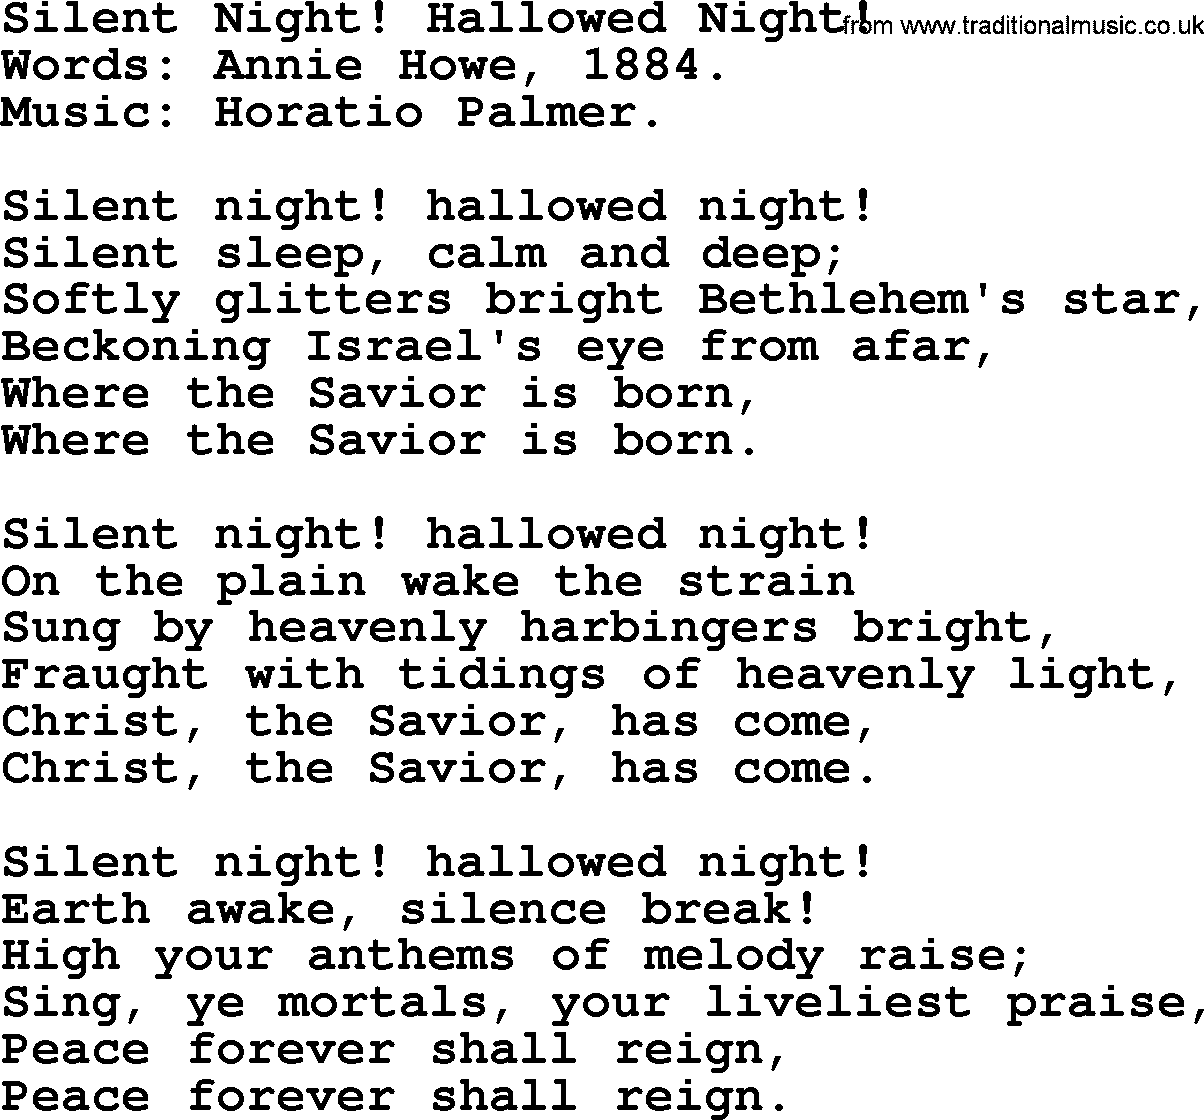 Christmas Hymns, Carols and Songs, title Silent Night! Hallowed Night